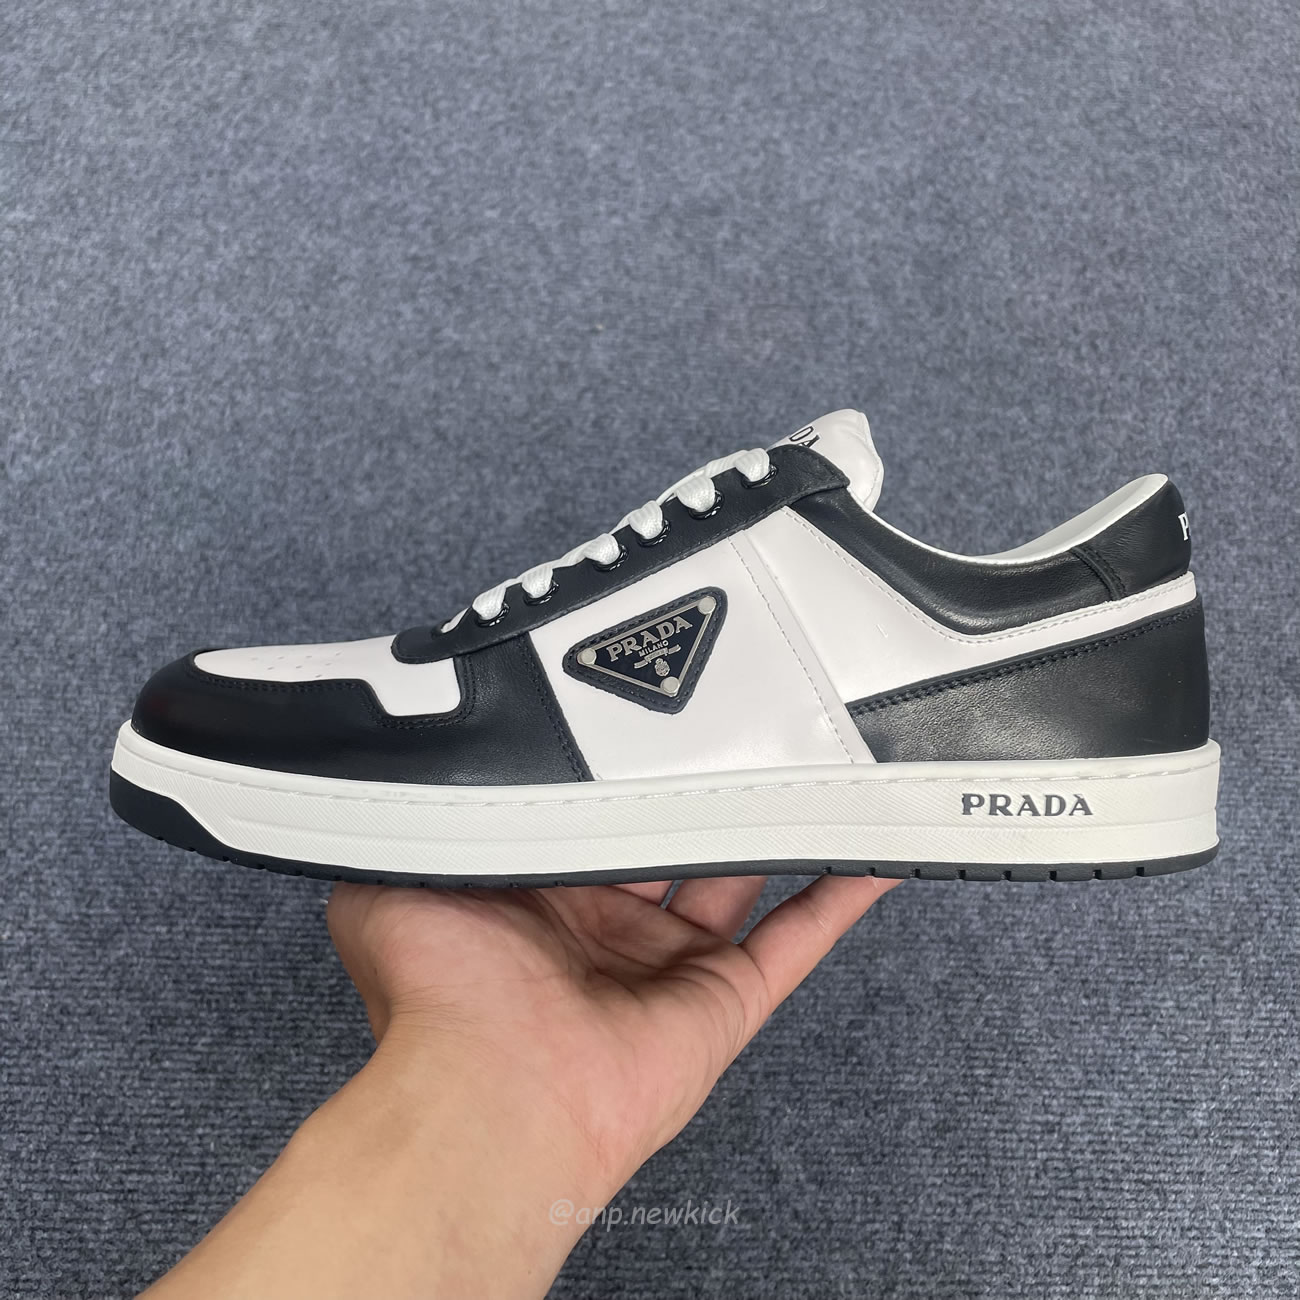 Prada Downtown Low Top Sneakers Leather White Black 2ee364 3lkg F0964 (2) - newkick.org